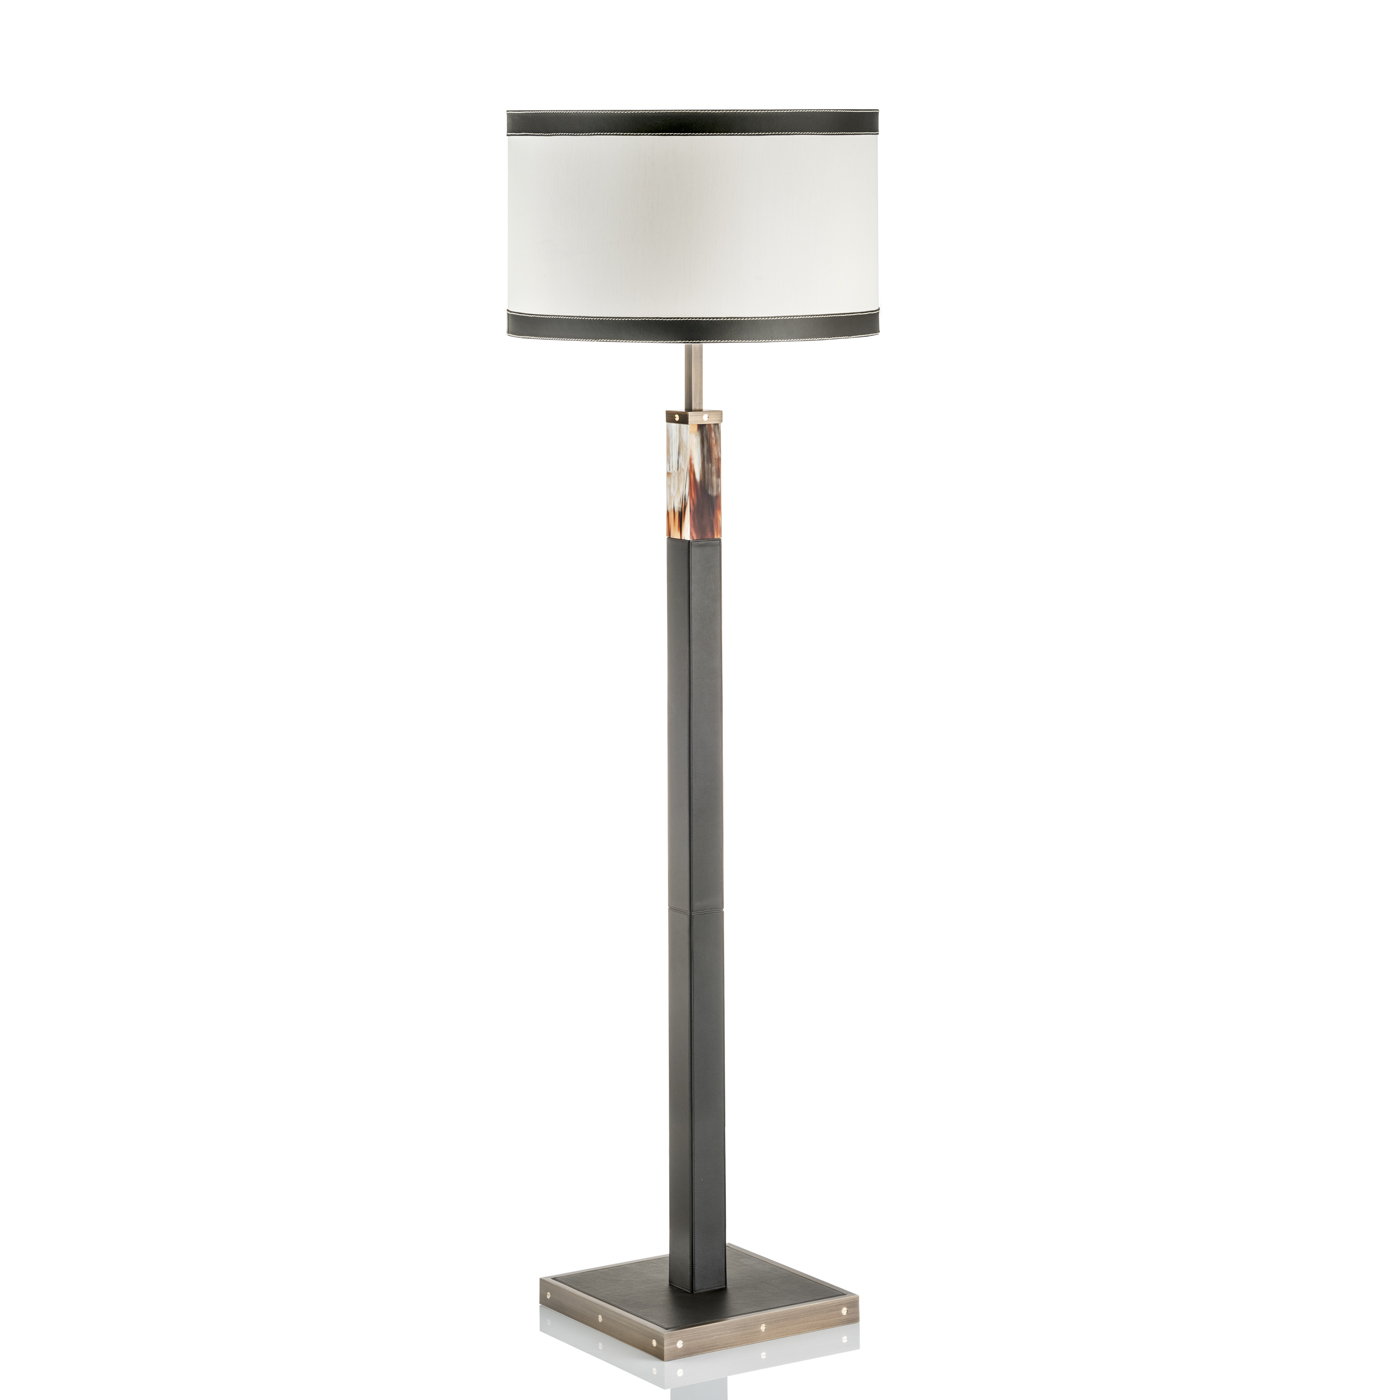 Lamps - Alma floor lamp in horn and leather - Arcahorn